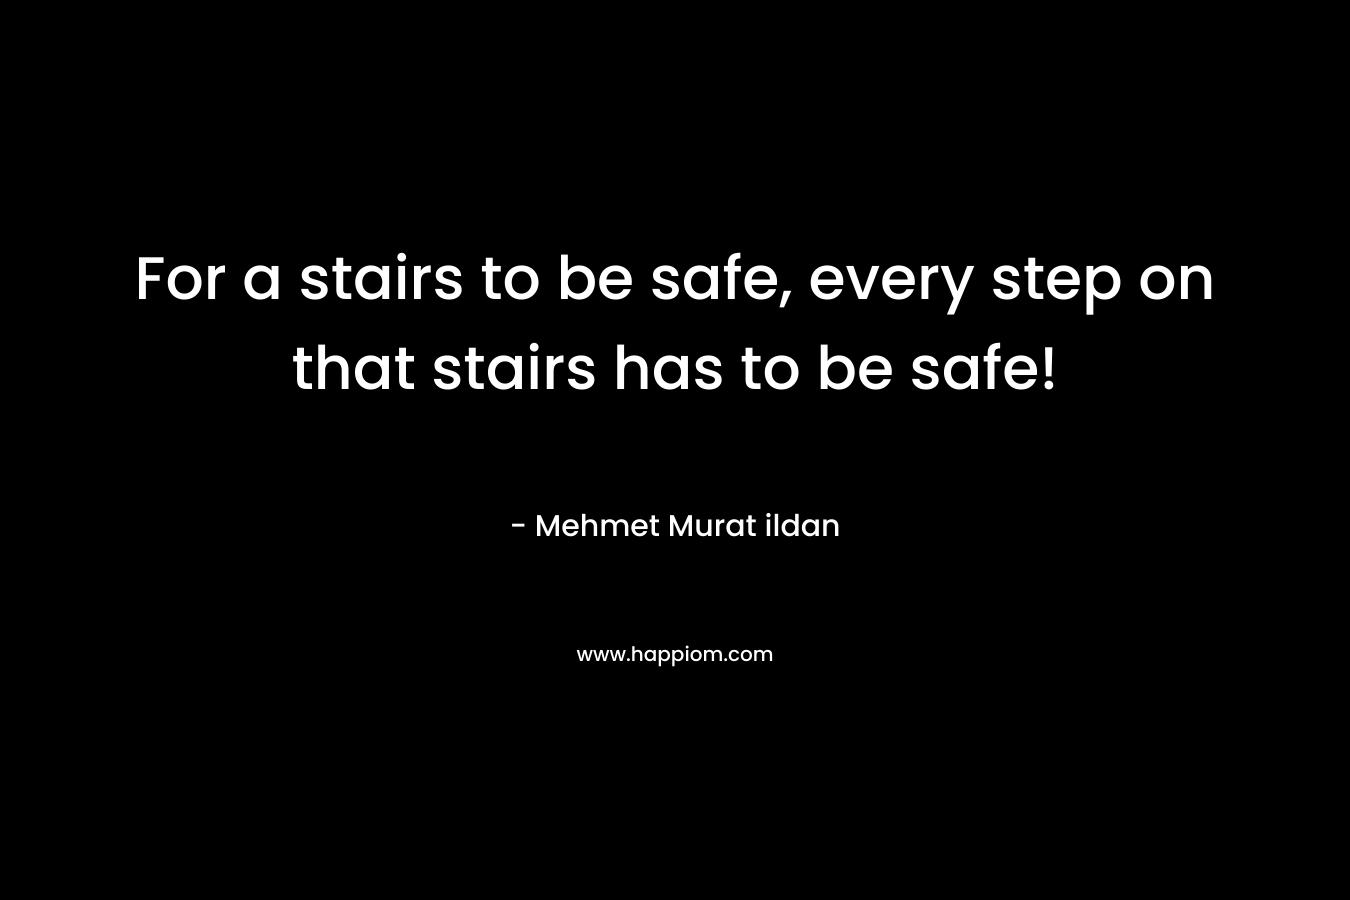 For a stairs to be safe, every step on that stairs has to be safe!